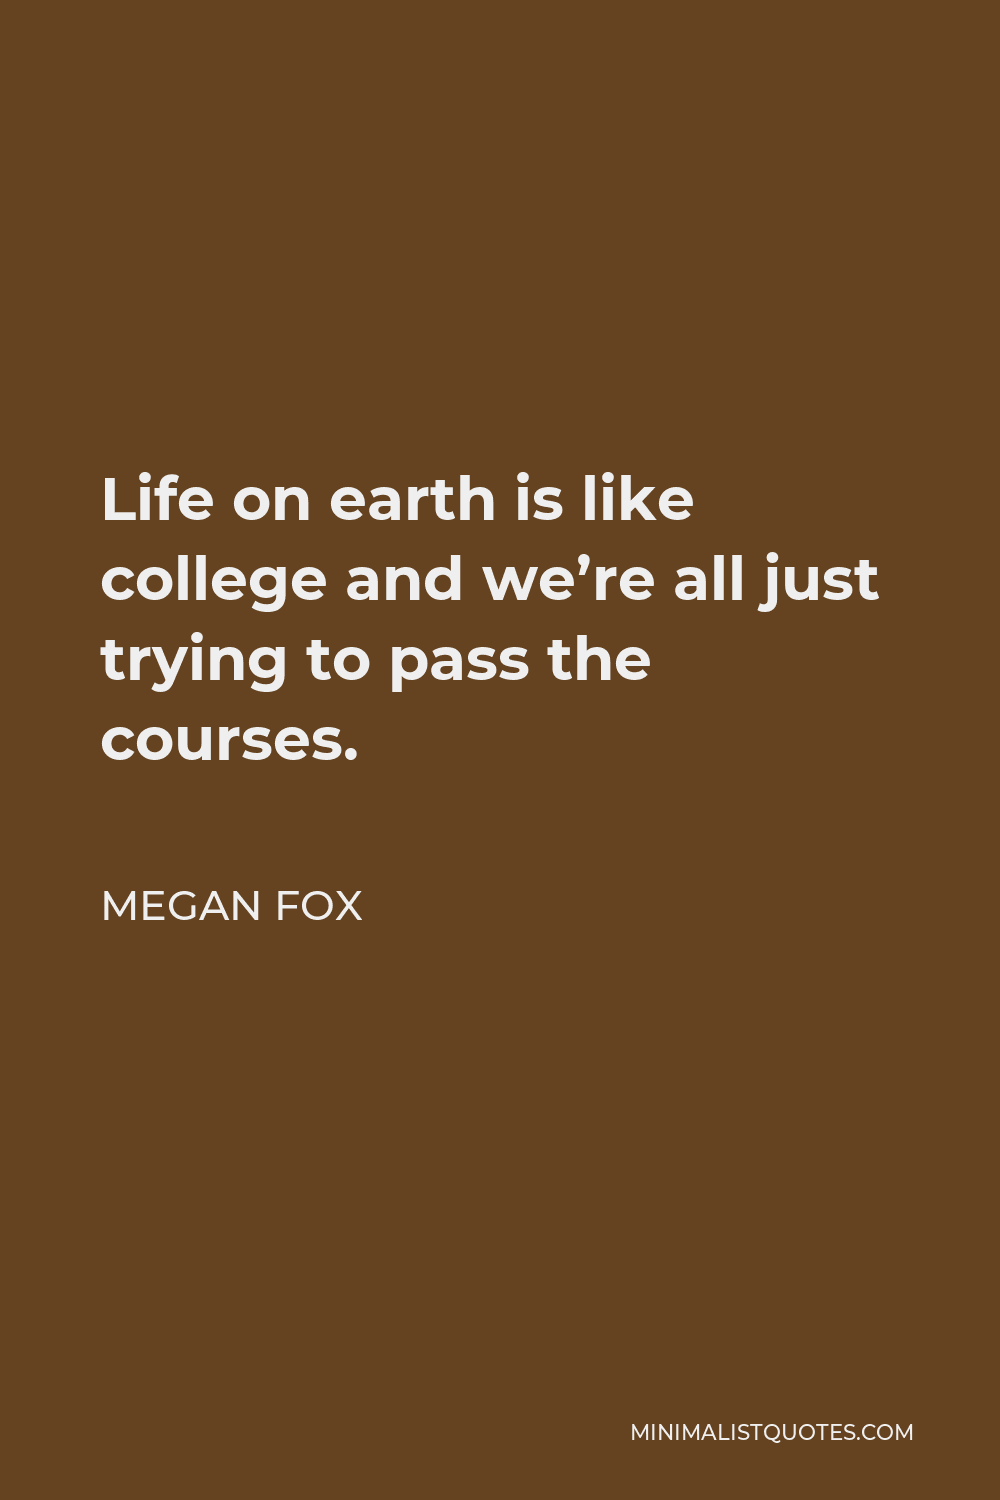 Megan Fox Quote - Life on earth is like college and we’re all just trying to pass the courses.